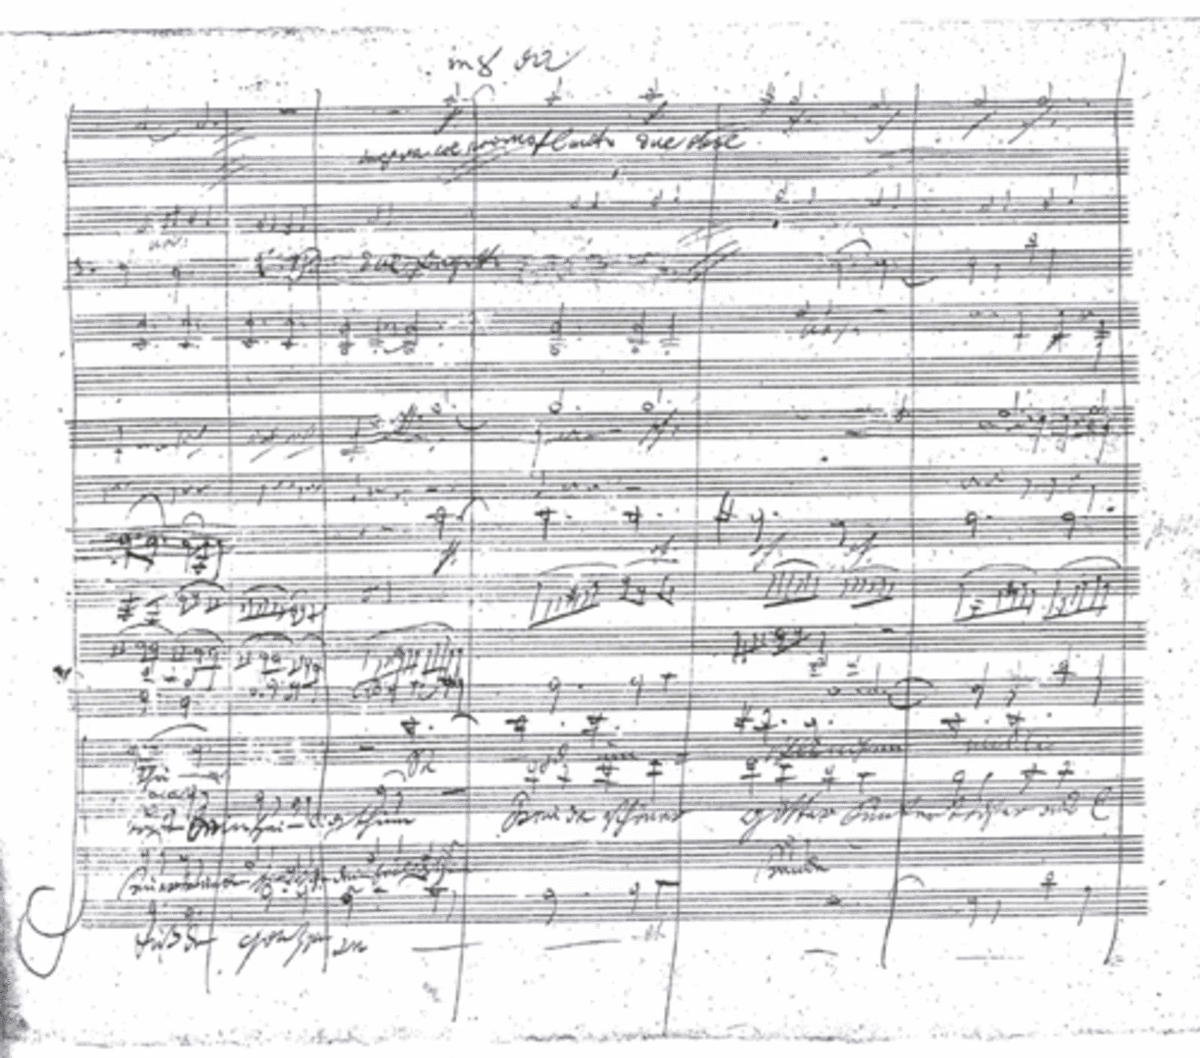 A page from the score of the 9th Symphony.